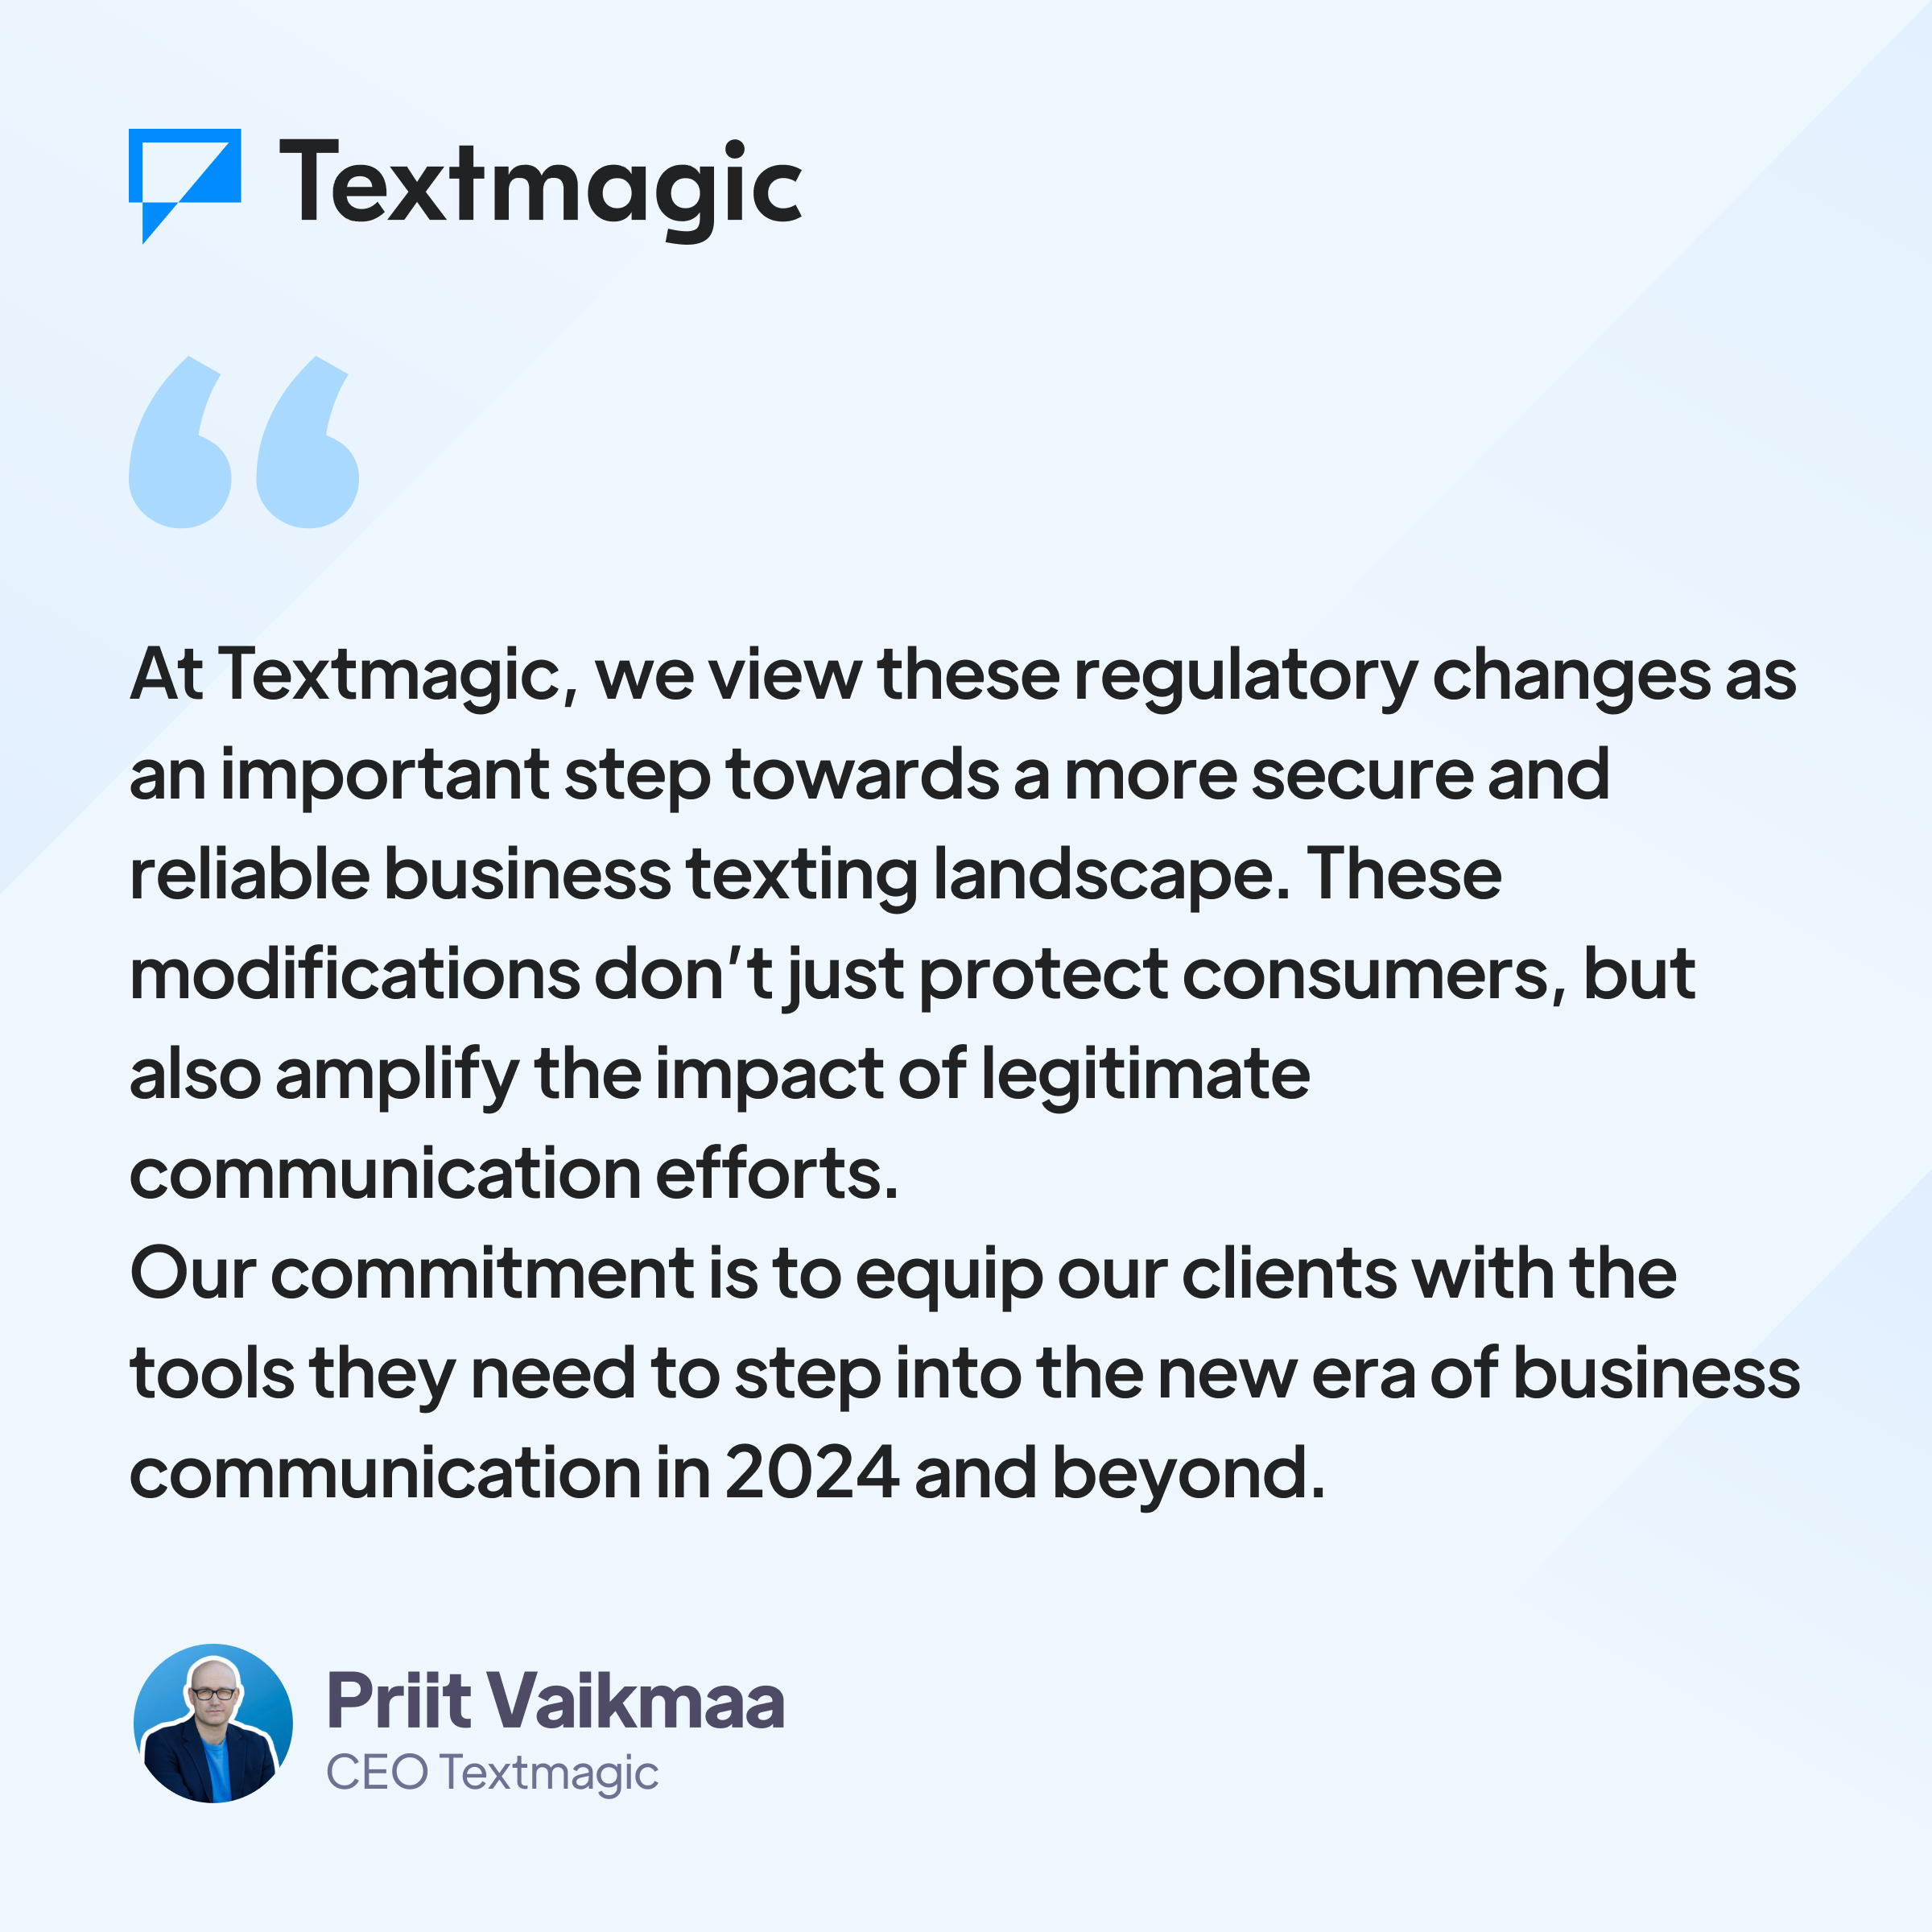 A quote from the Textmagic CEO